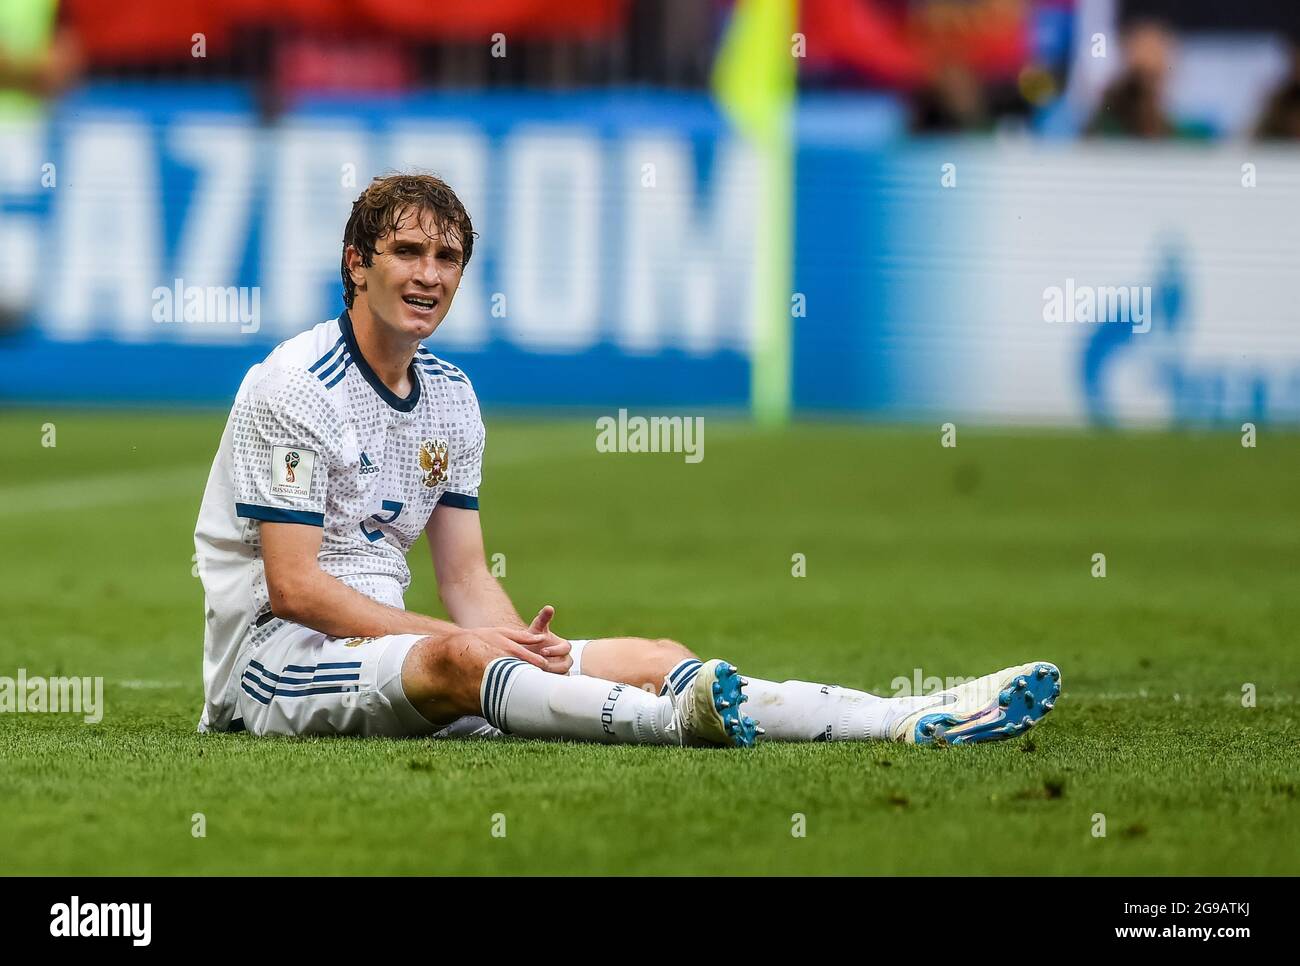 Moscow, Russia - July 1, 2018. Russia national football team defender Mario Fernandes sitting on the pitch having been committed a foul upon during FI Stock Photo